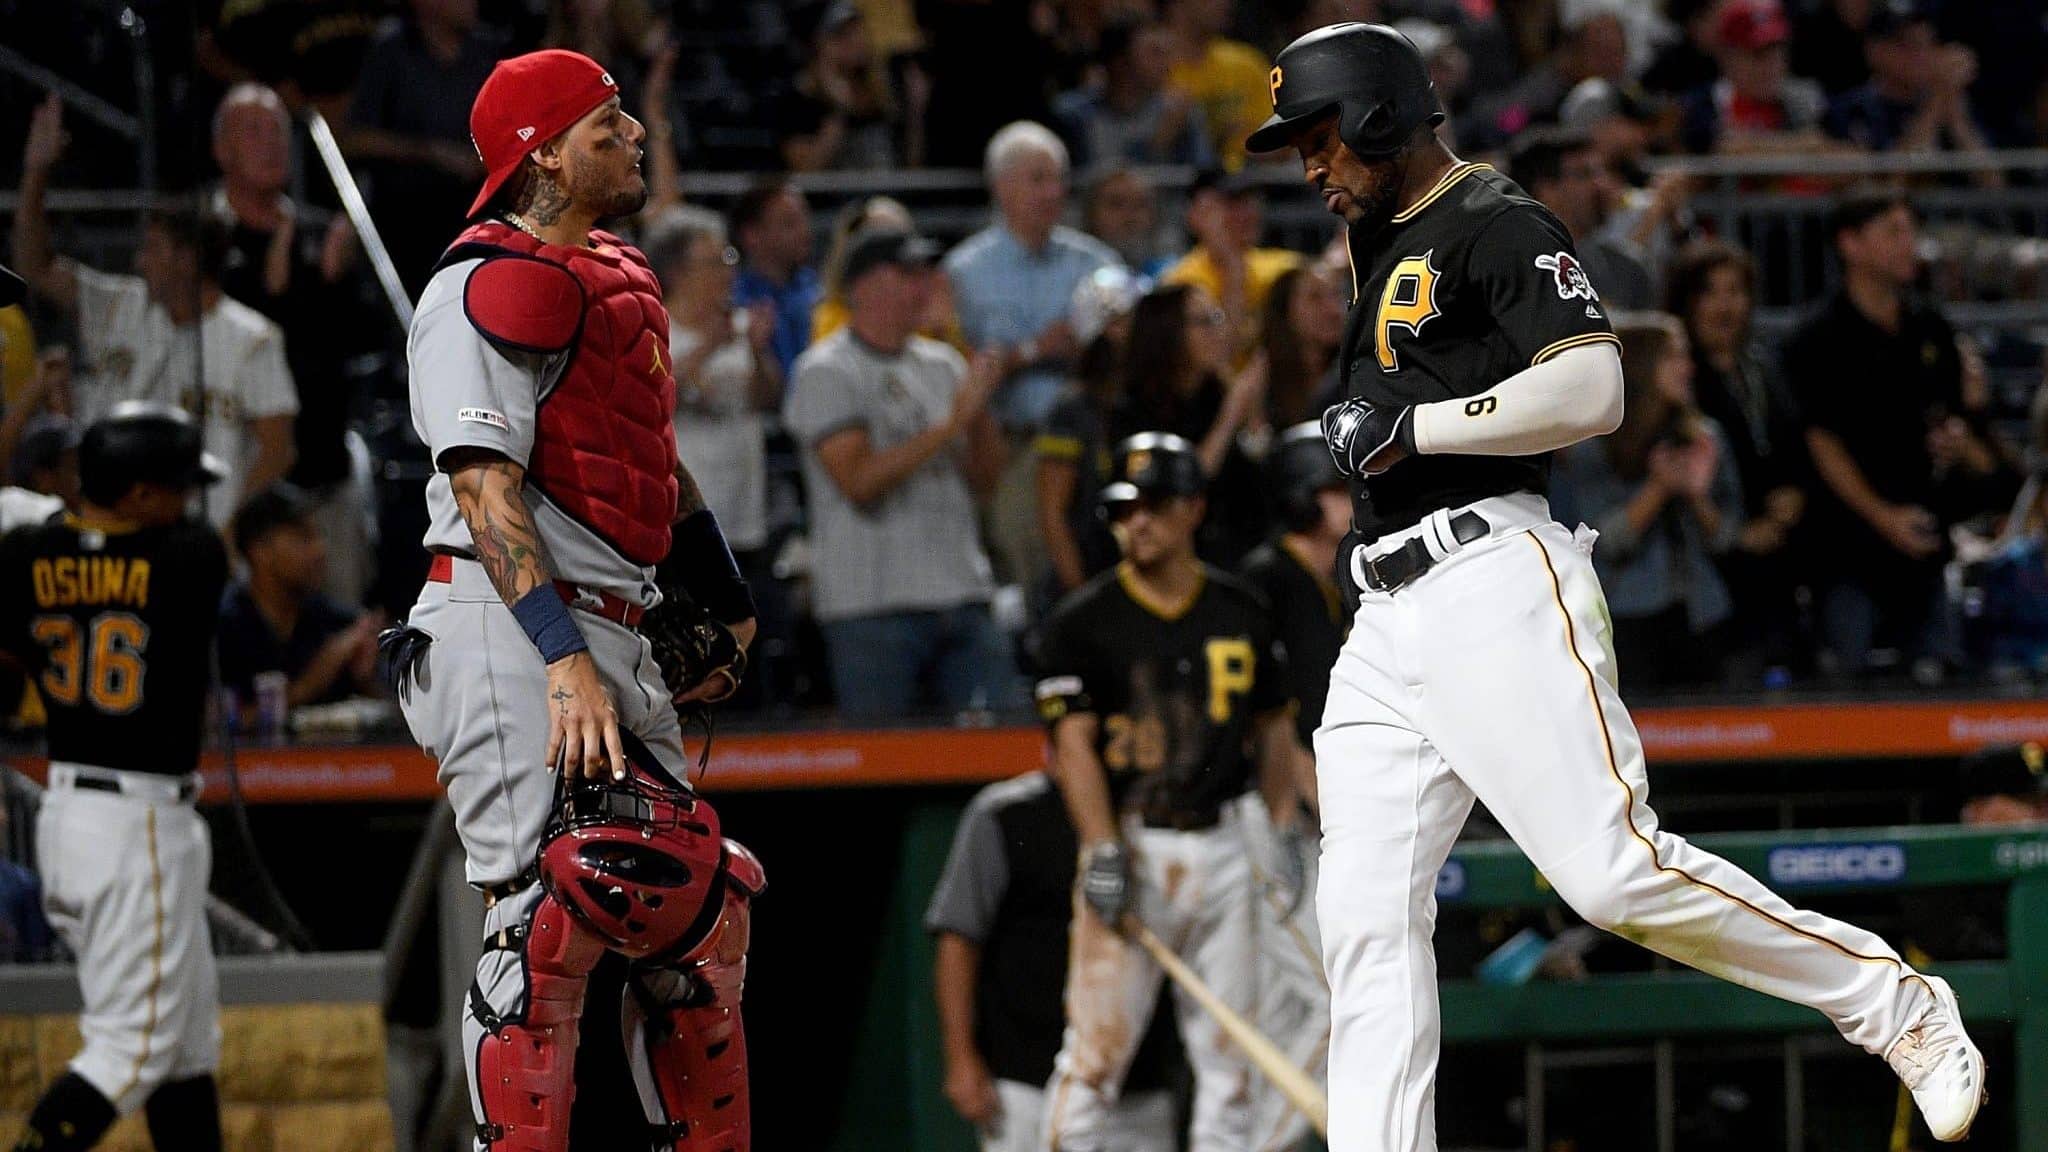 PITTSBURGH, PA - SEPTEMBER 06: Starling Marte #6 of the Pittsburgh Pirates comes around to score in front of Yadier Molina #4 of the St. Louis Cardinals in the seventh inning during the game at PNC Park on September 6, 2019 in Pittsburgh, Pennsylvania.